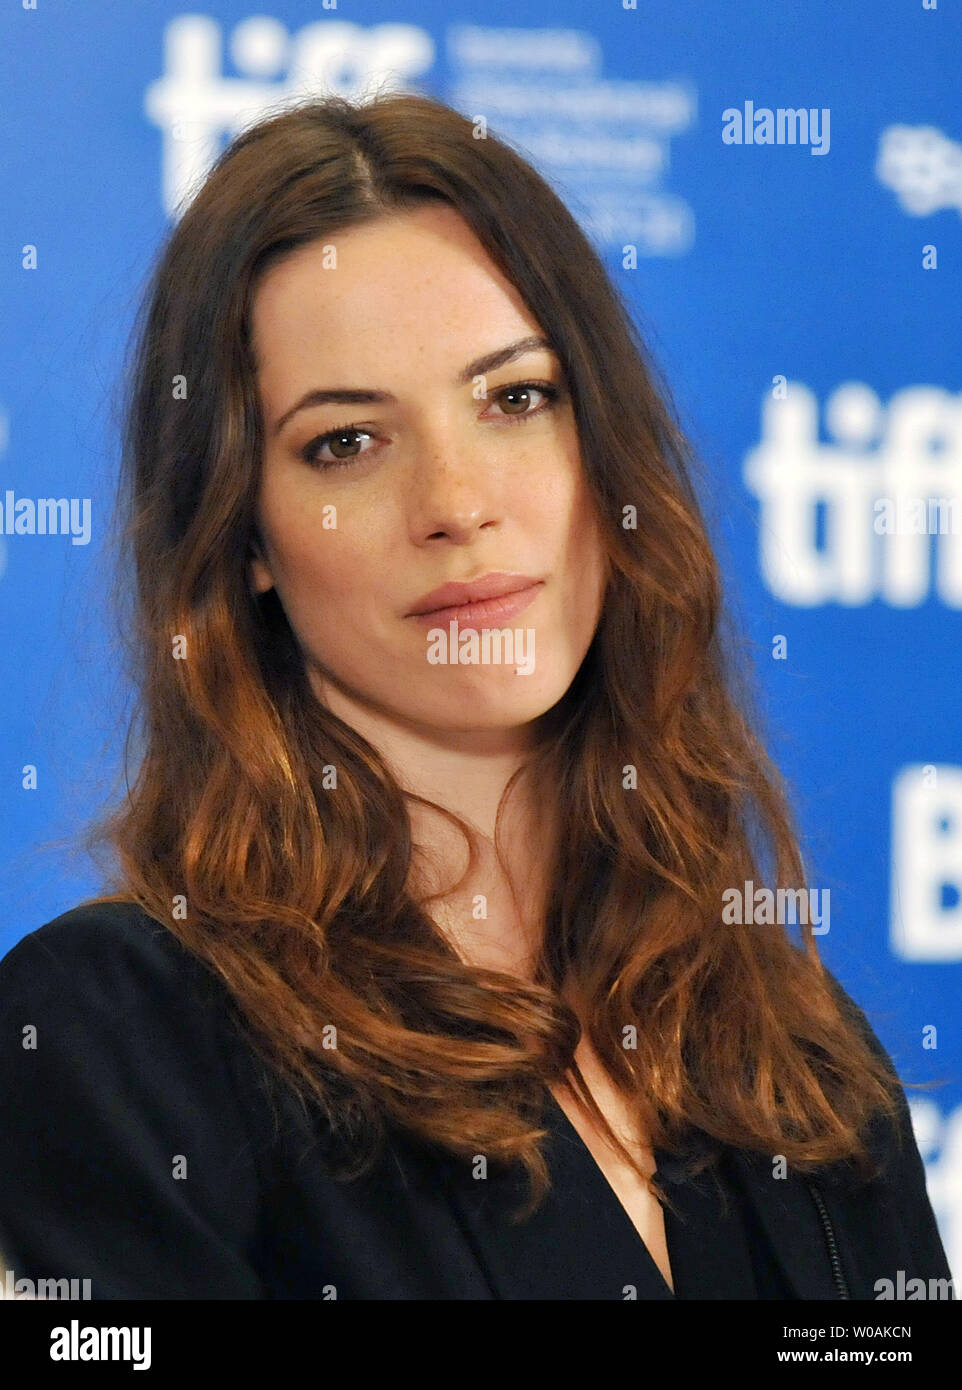 Actor Rebecca Hall attends the Toronto International Film Festival press conference for 'The Town' at the Hyatt Regency Hotel in Toronto, Canada on September 10, 2010. UPI/Christine Chew Stock Photo